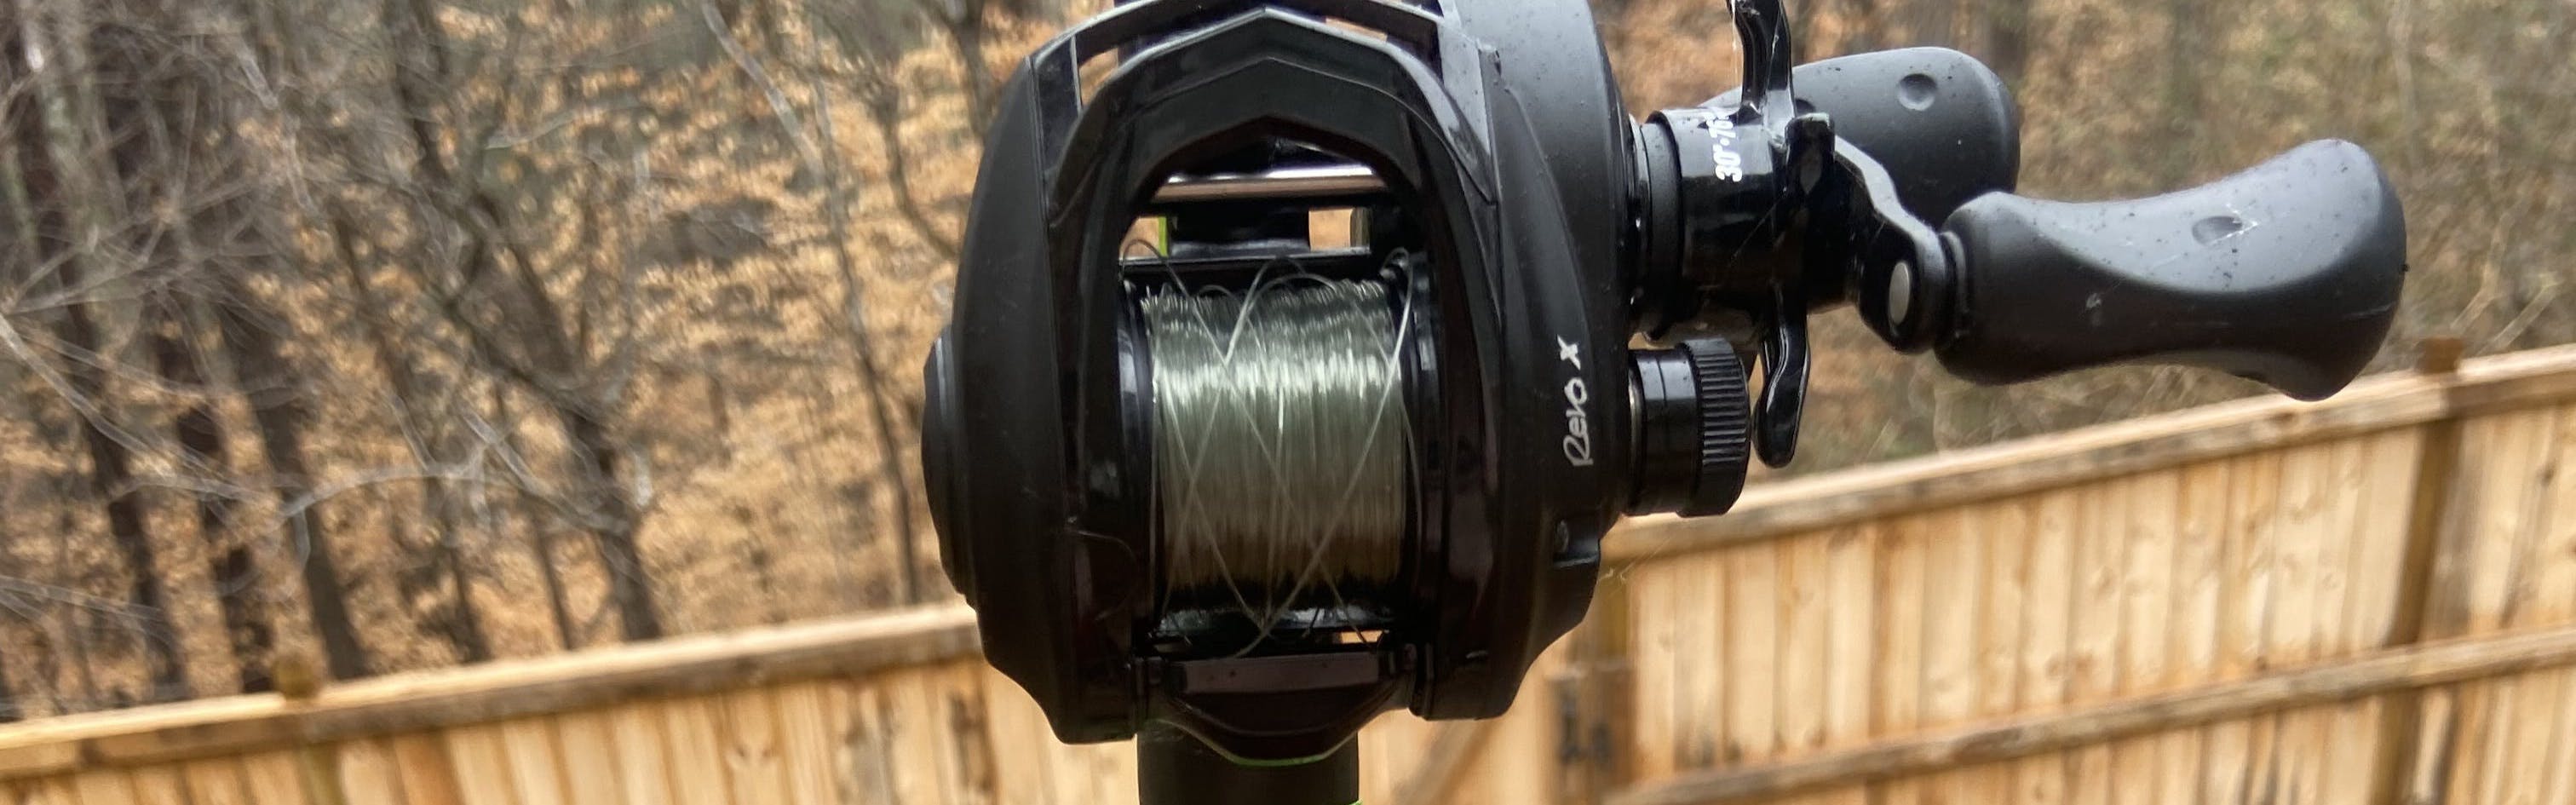 Expert Review: Daiwa Saltist 2 Speed Lever Drag Conventional Reels